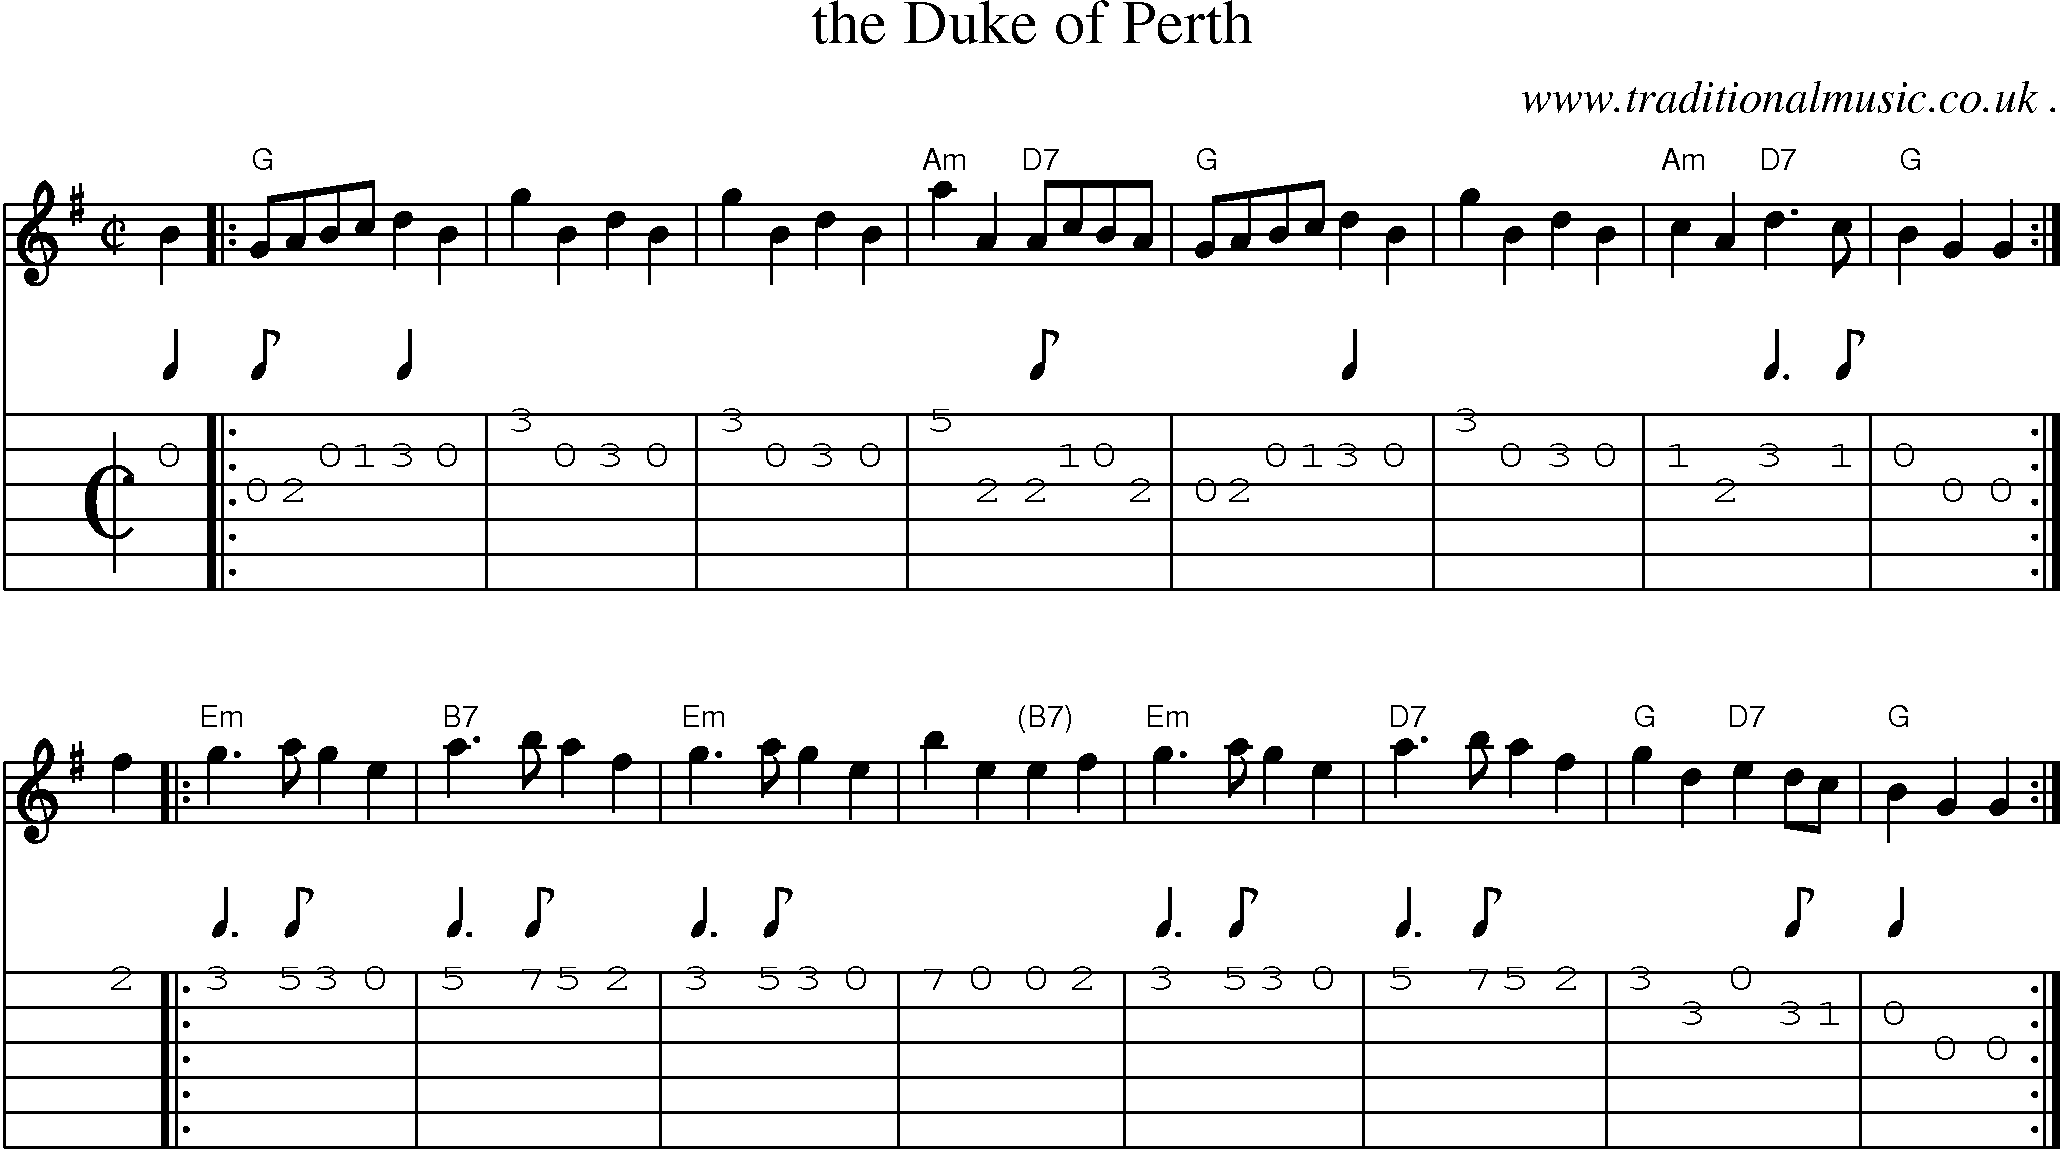 Sheet-music  score, Chords and Guitar Tabs for The Duke Of Perth